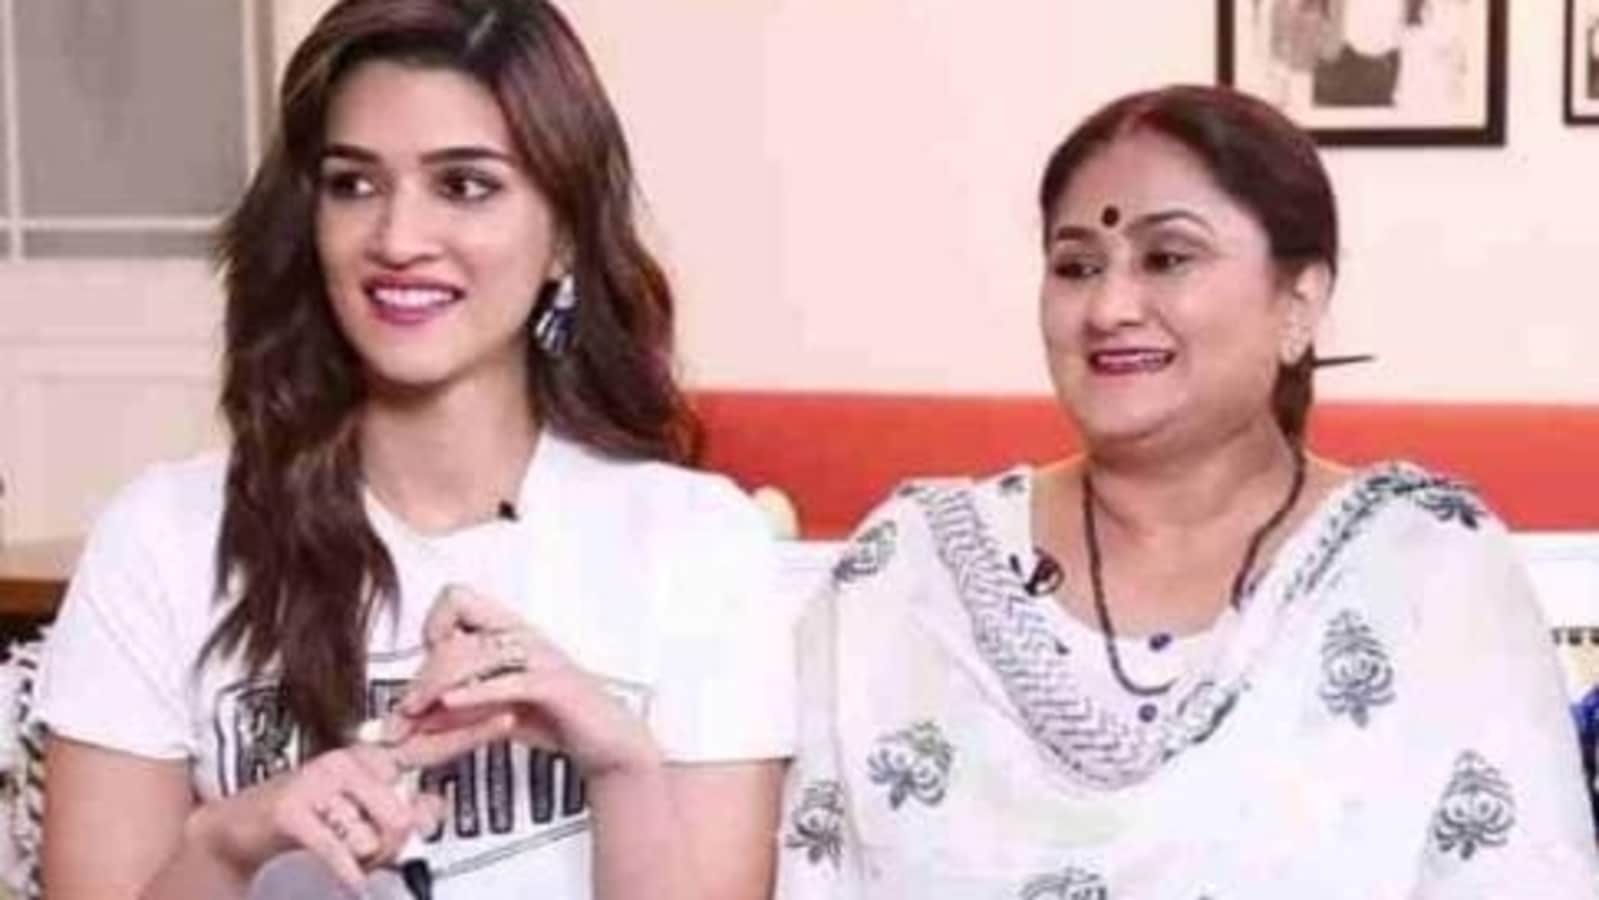 kriti-sanon-s-mother-geeta-sanon-says-her-students-call-her-kriti-s-mom-now-even-in-college-my-identity-has-changed